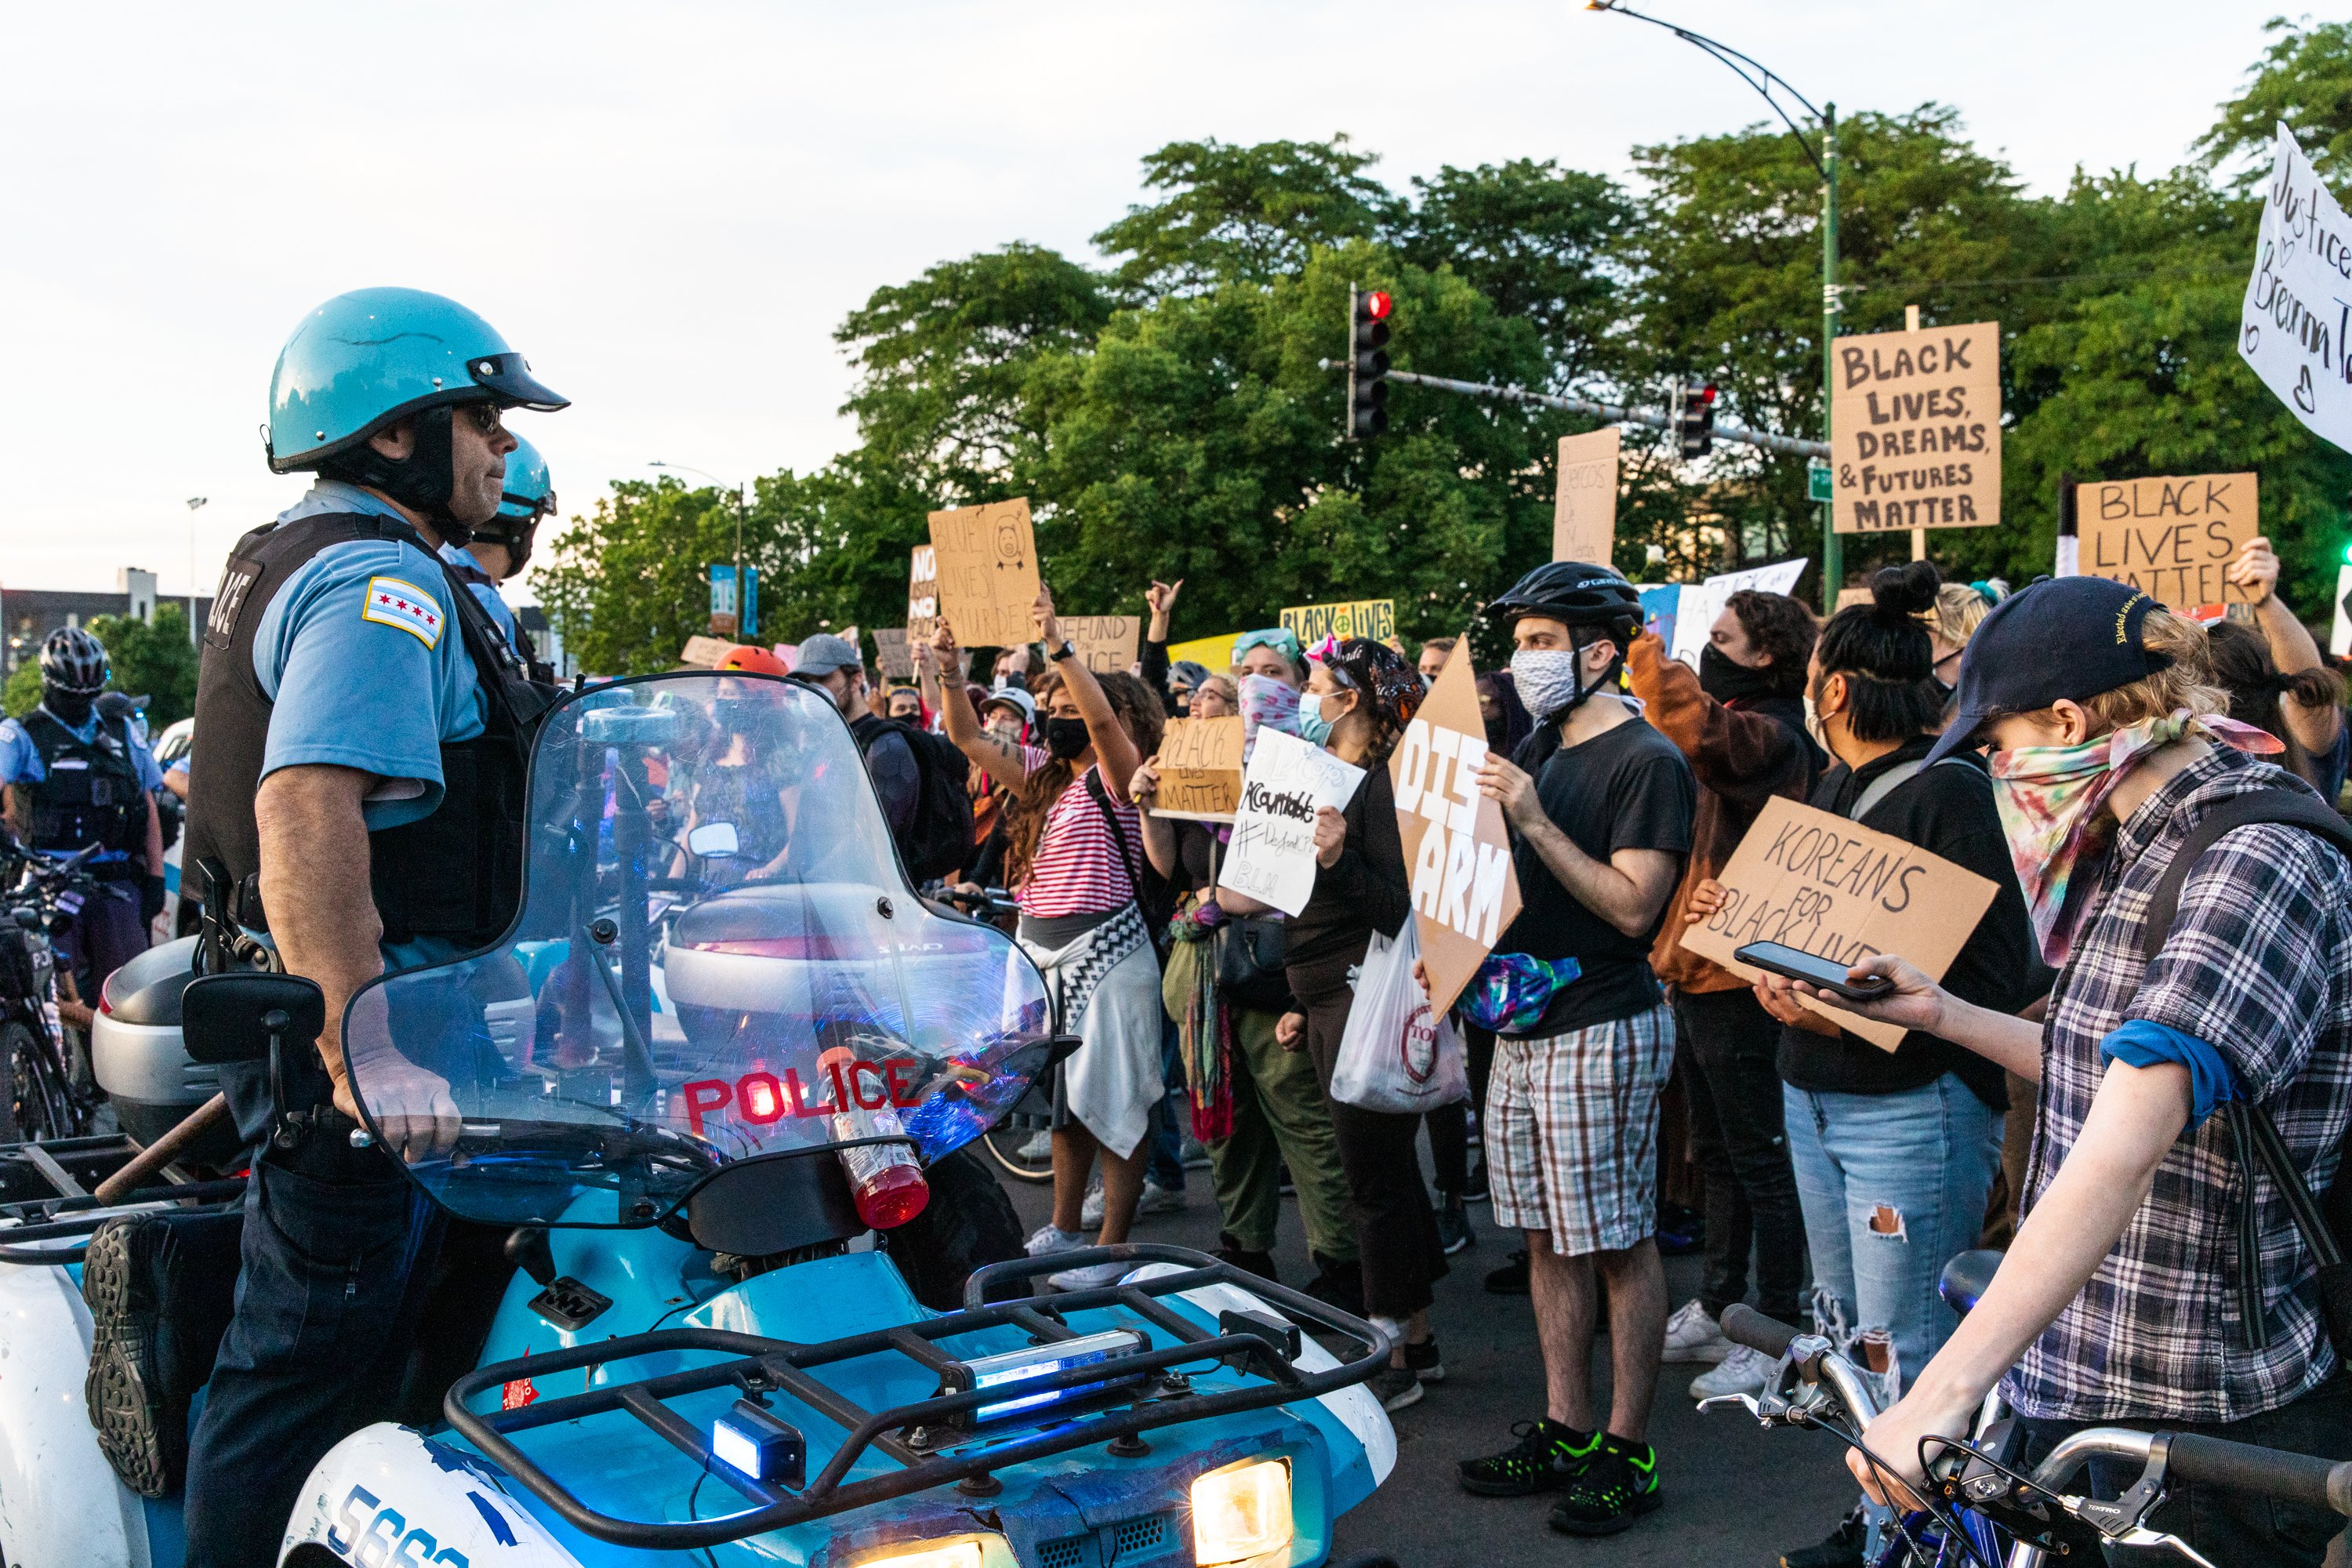 Protesters chant and wave signs at Chicago police during a protest on June 06, 2020 in Chicago, Illinois. (Photo: Natasha Moustache/Getty Images)